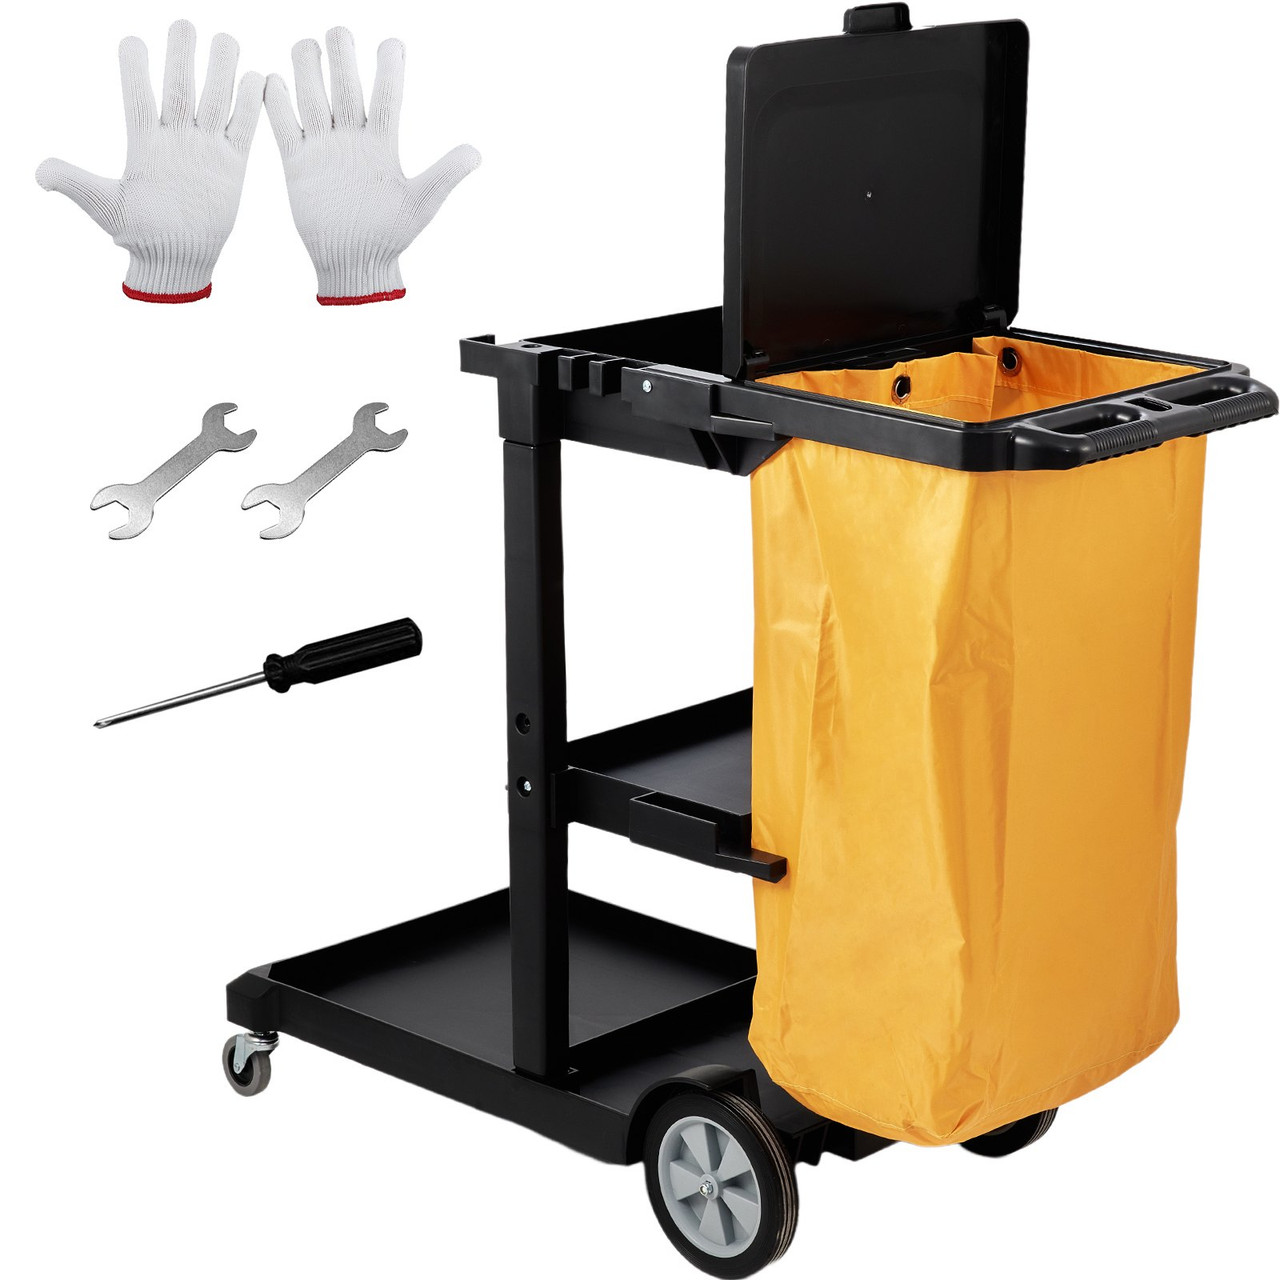 Cleaning Cart, 3-Shelf Commercial Janitorial Cart, 200 lbs Capacity Plastic Housekeeping Cart, with 25 Gallon PVC Bag and Cover, 47 x 20 x 38.6in, Yellow&Black